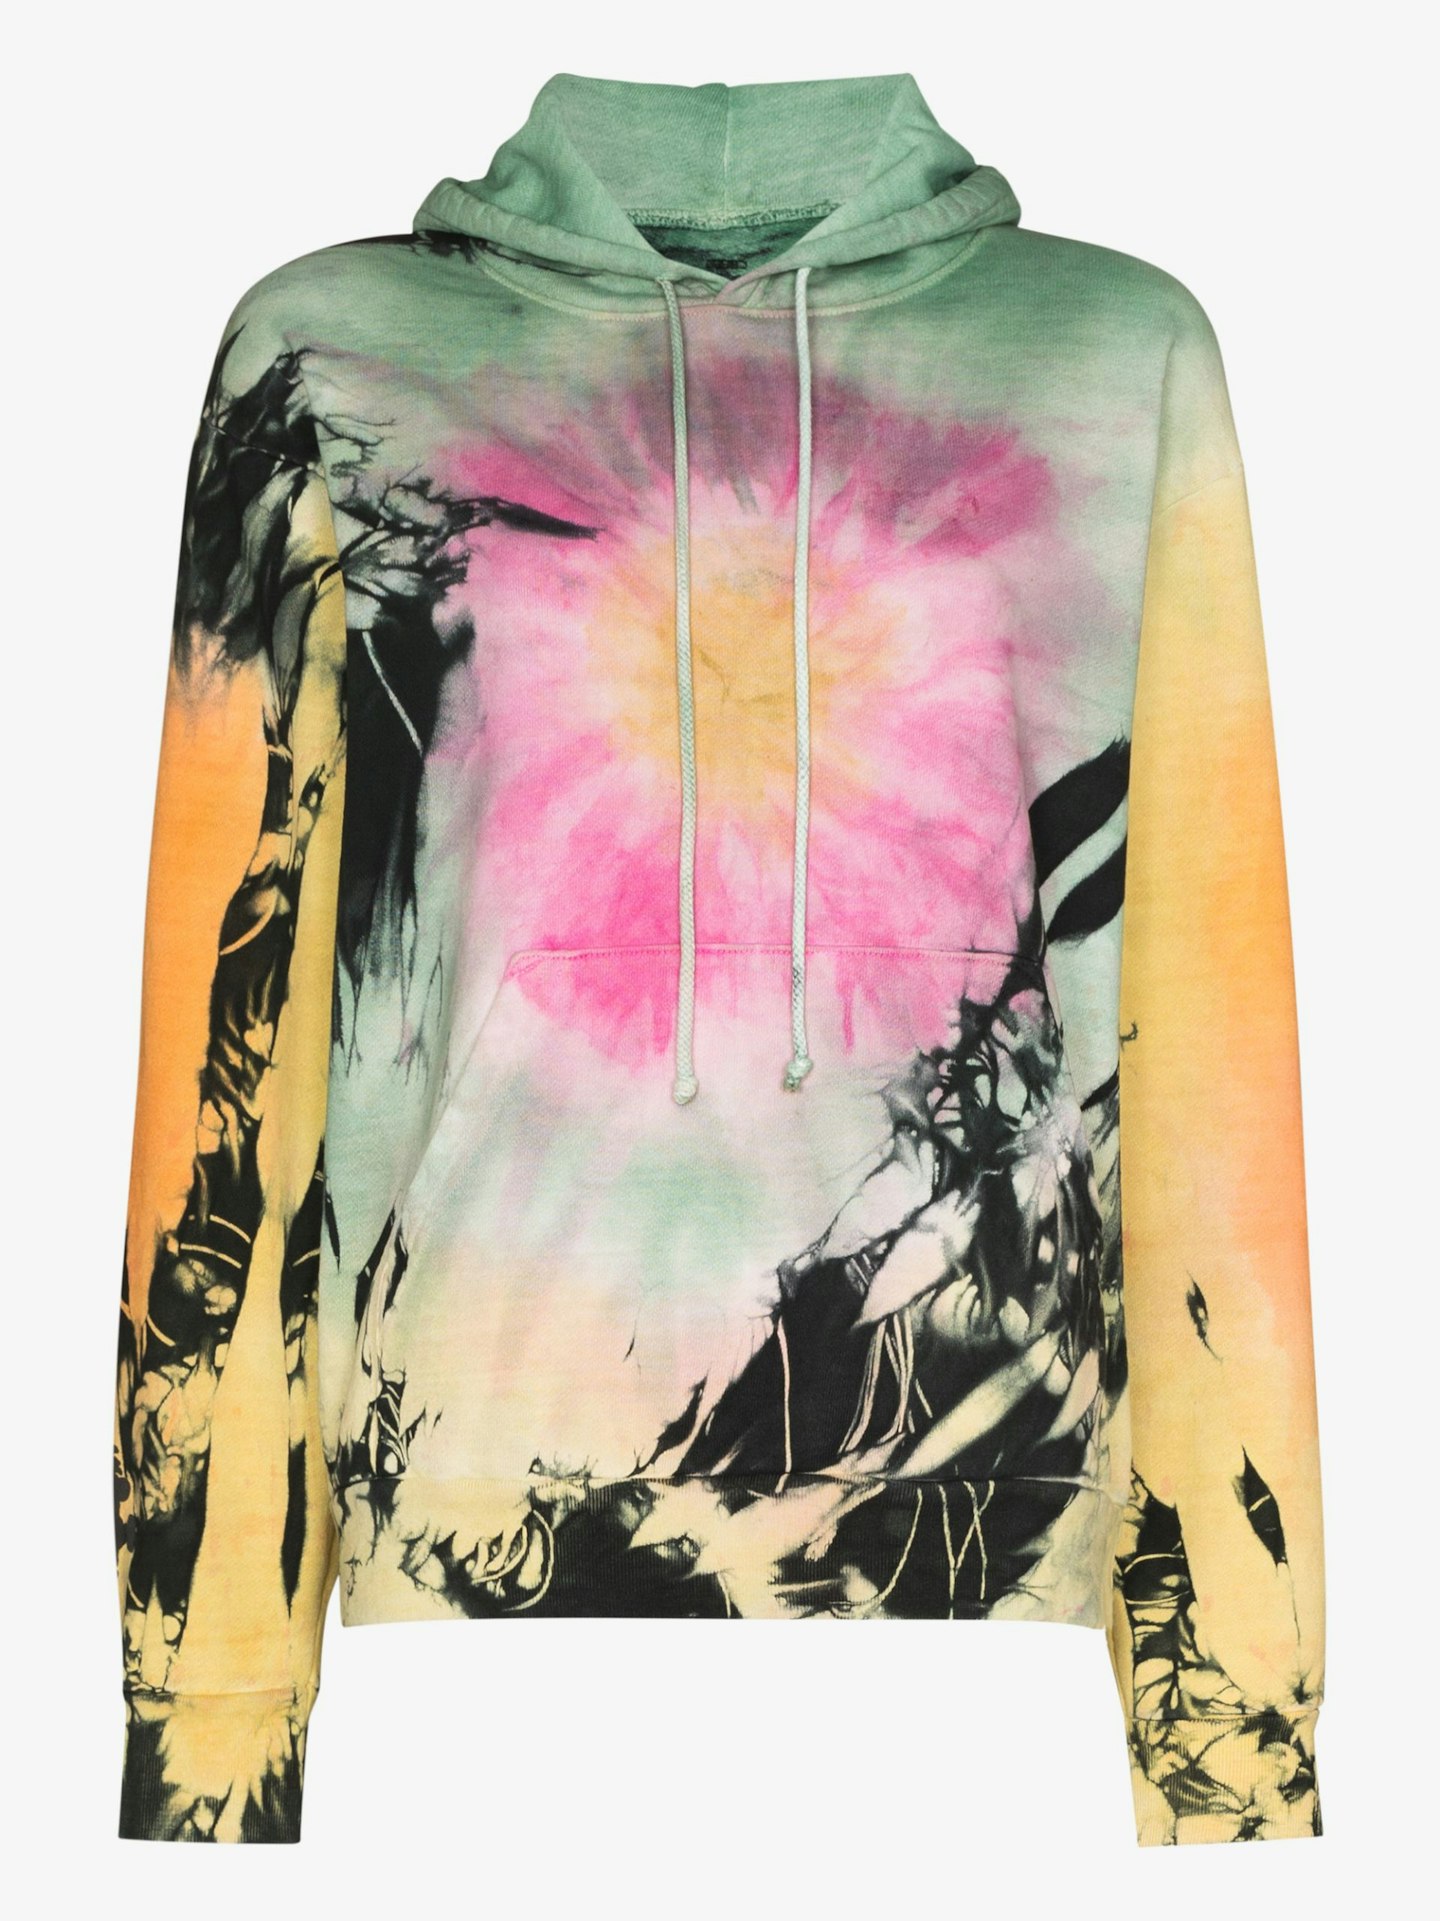 Come Back As A Flower, Tie-Dye Recycled Cotton Hoodie, £445